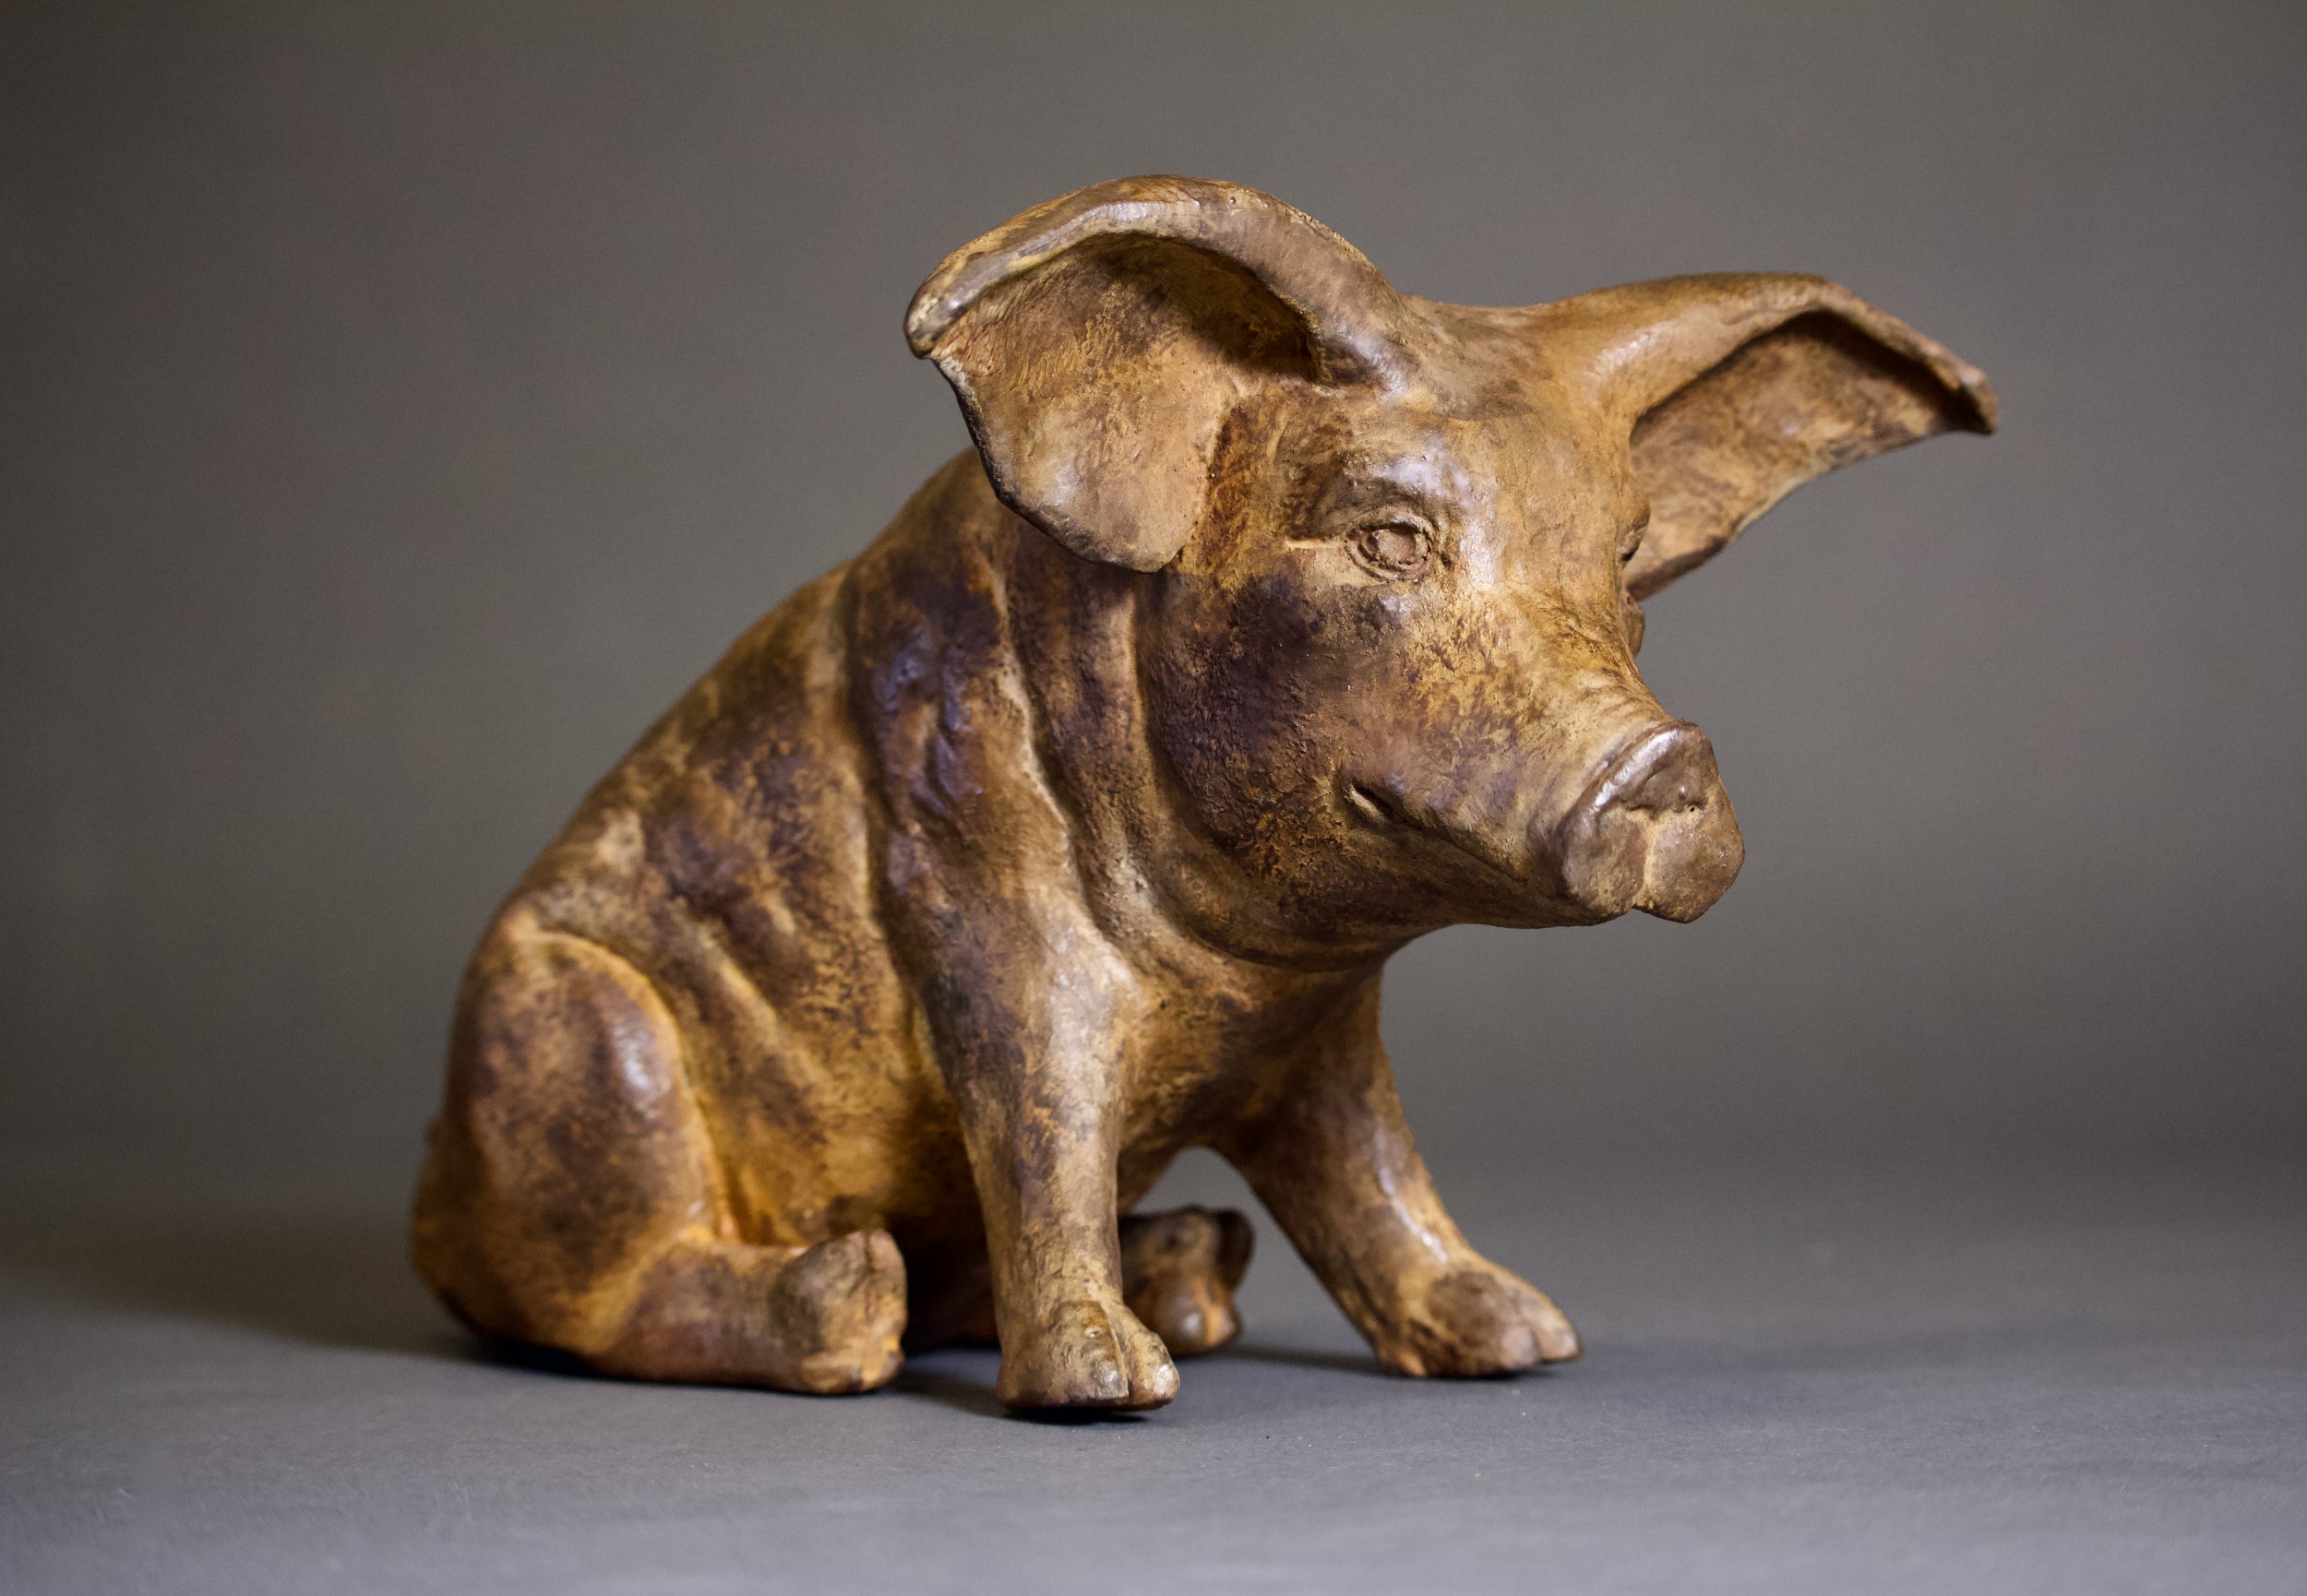 Silc Pig - The Compleat Sculptor